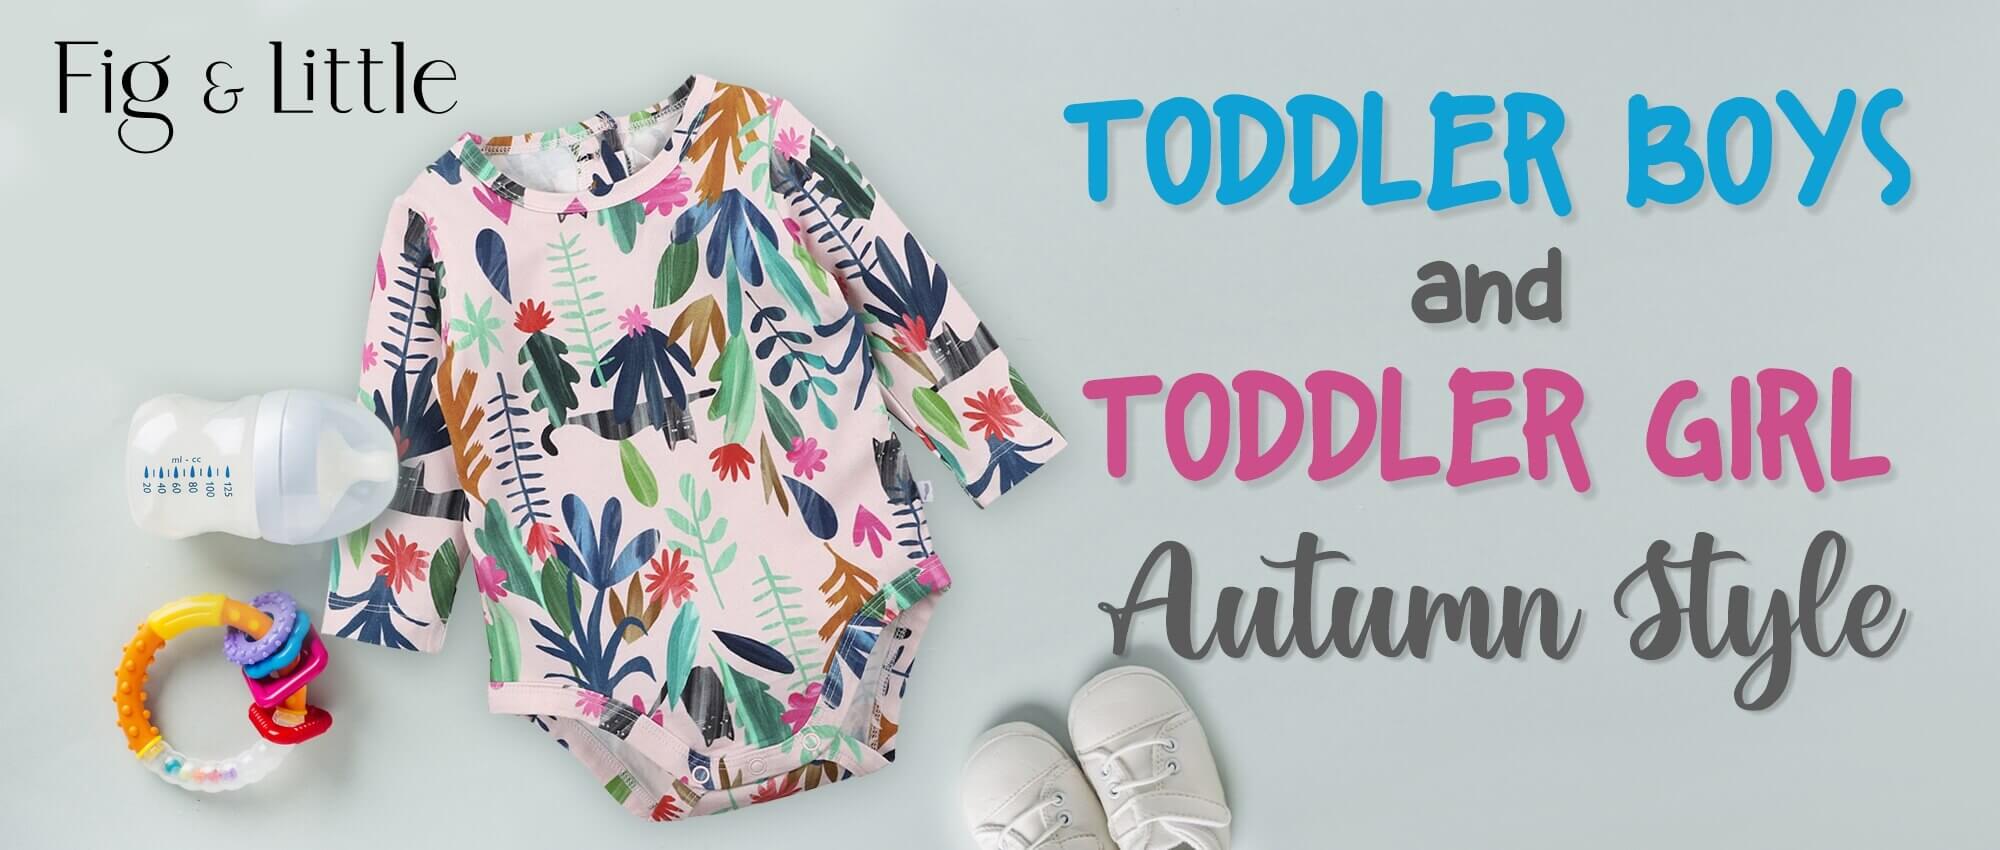 TODDLER BOYS AND TODDLER GIRL AUTUMN STYLES